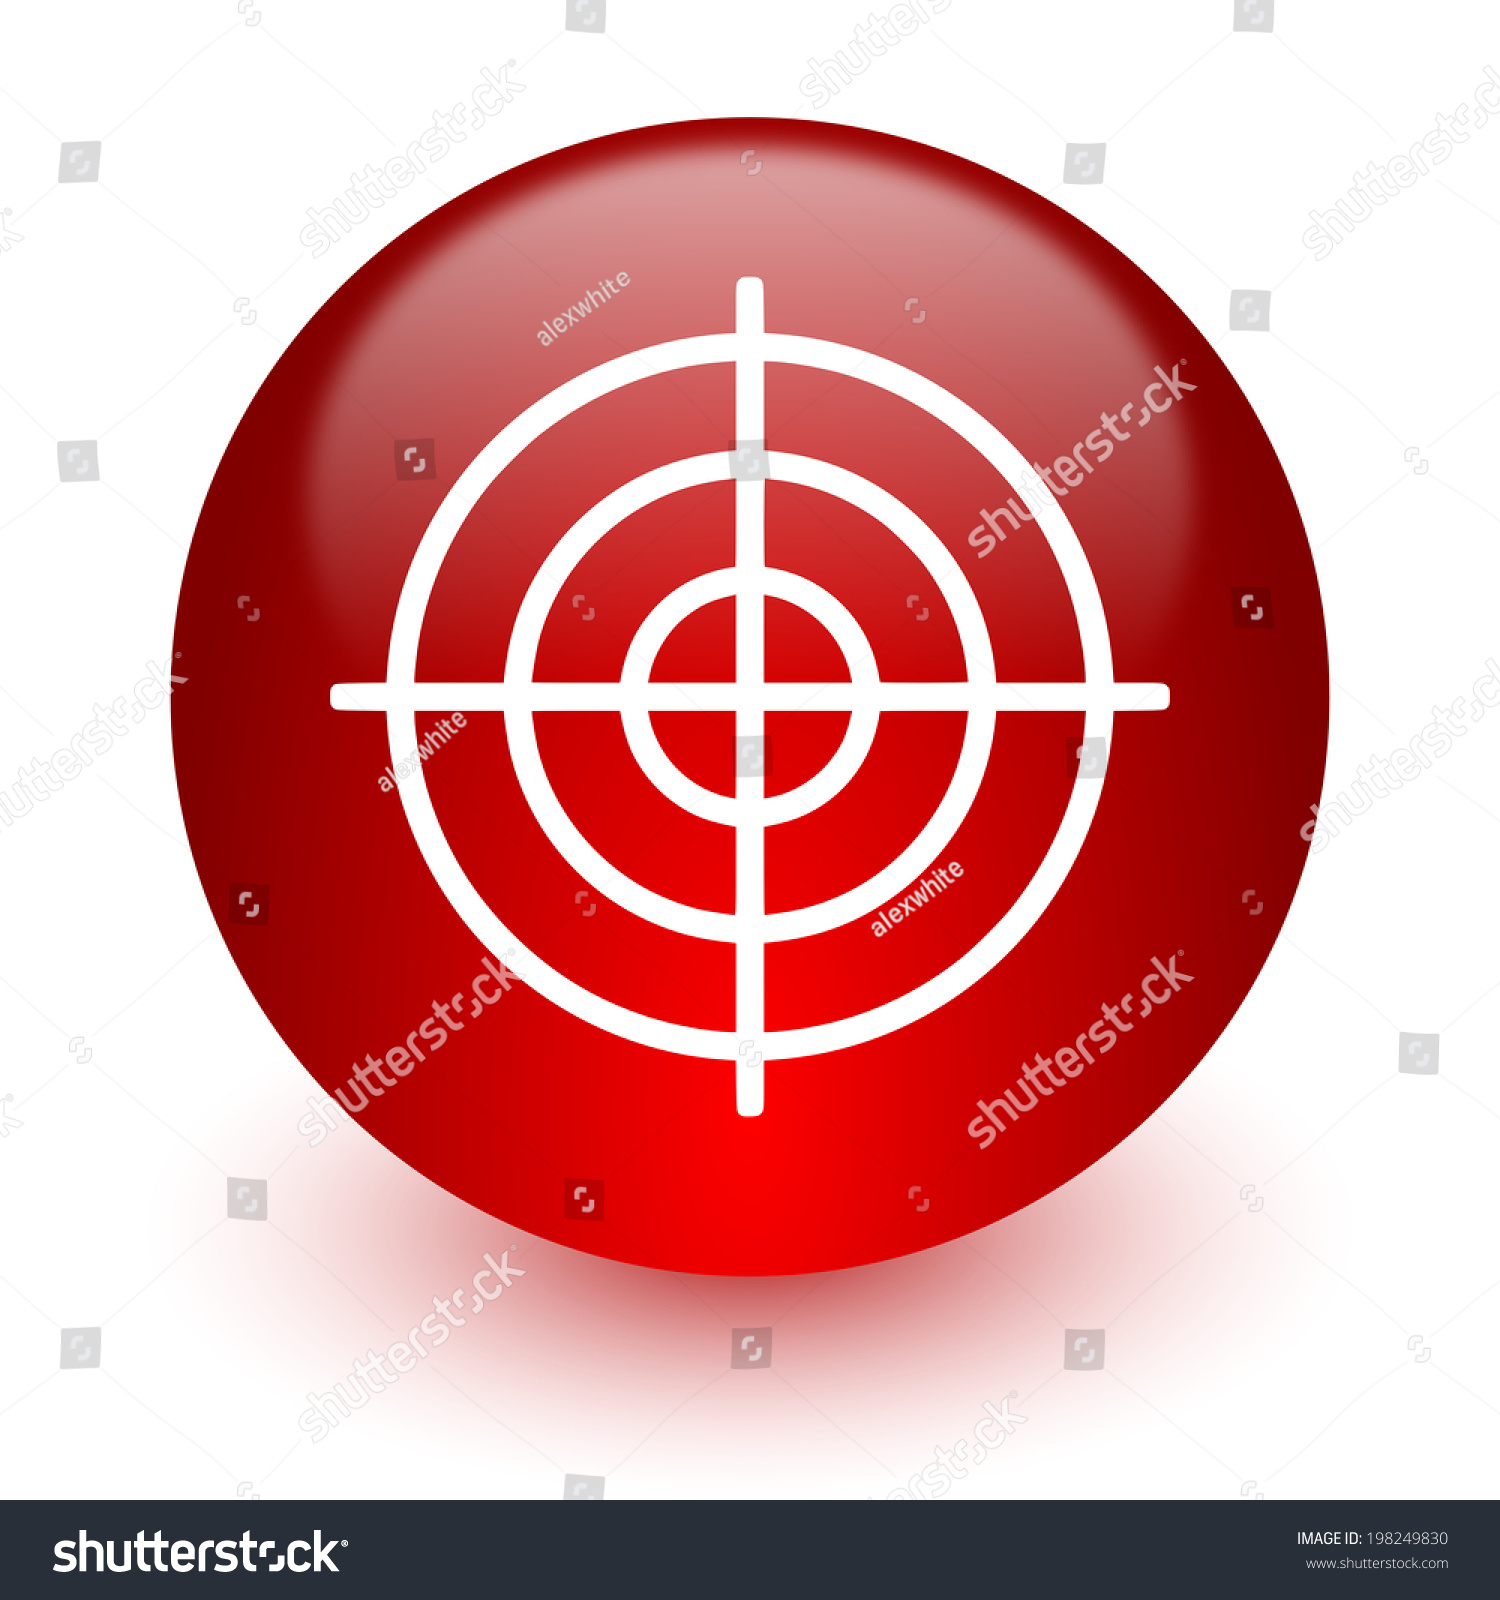 Target Red Computer Icon On White Background Stock Photo 198249830 ...